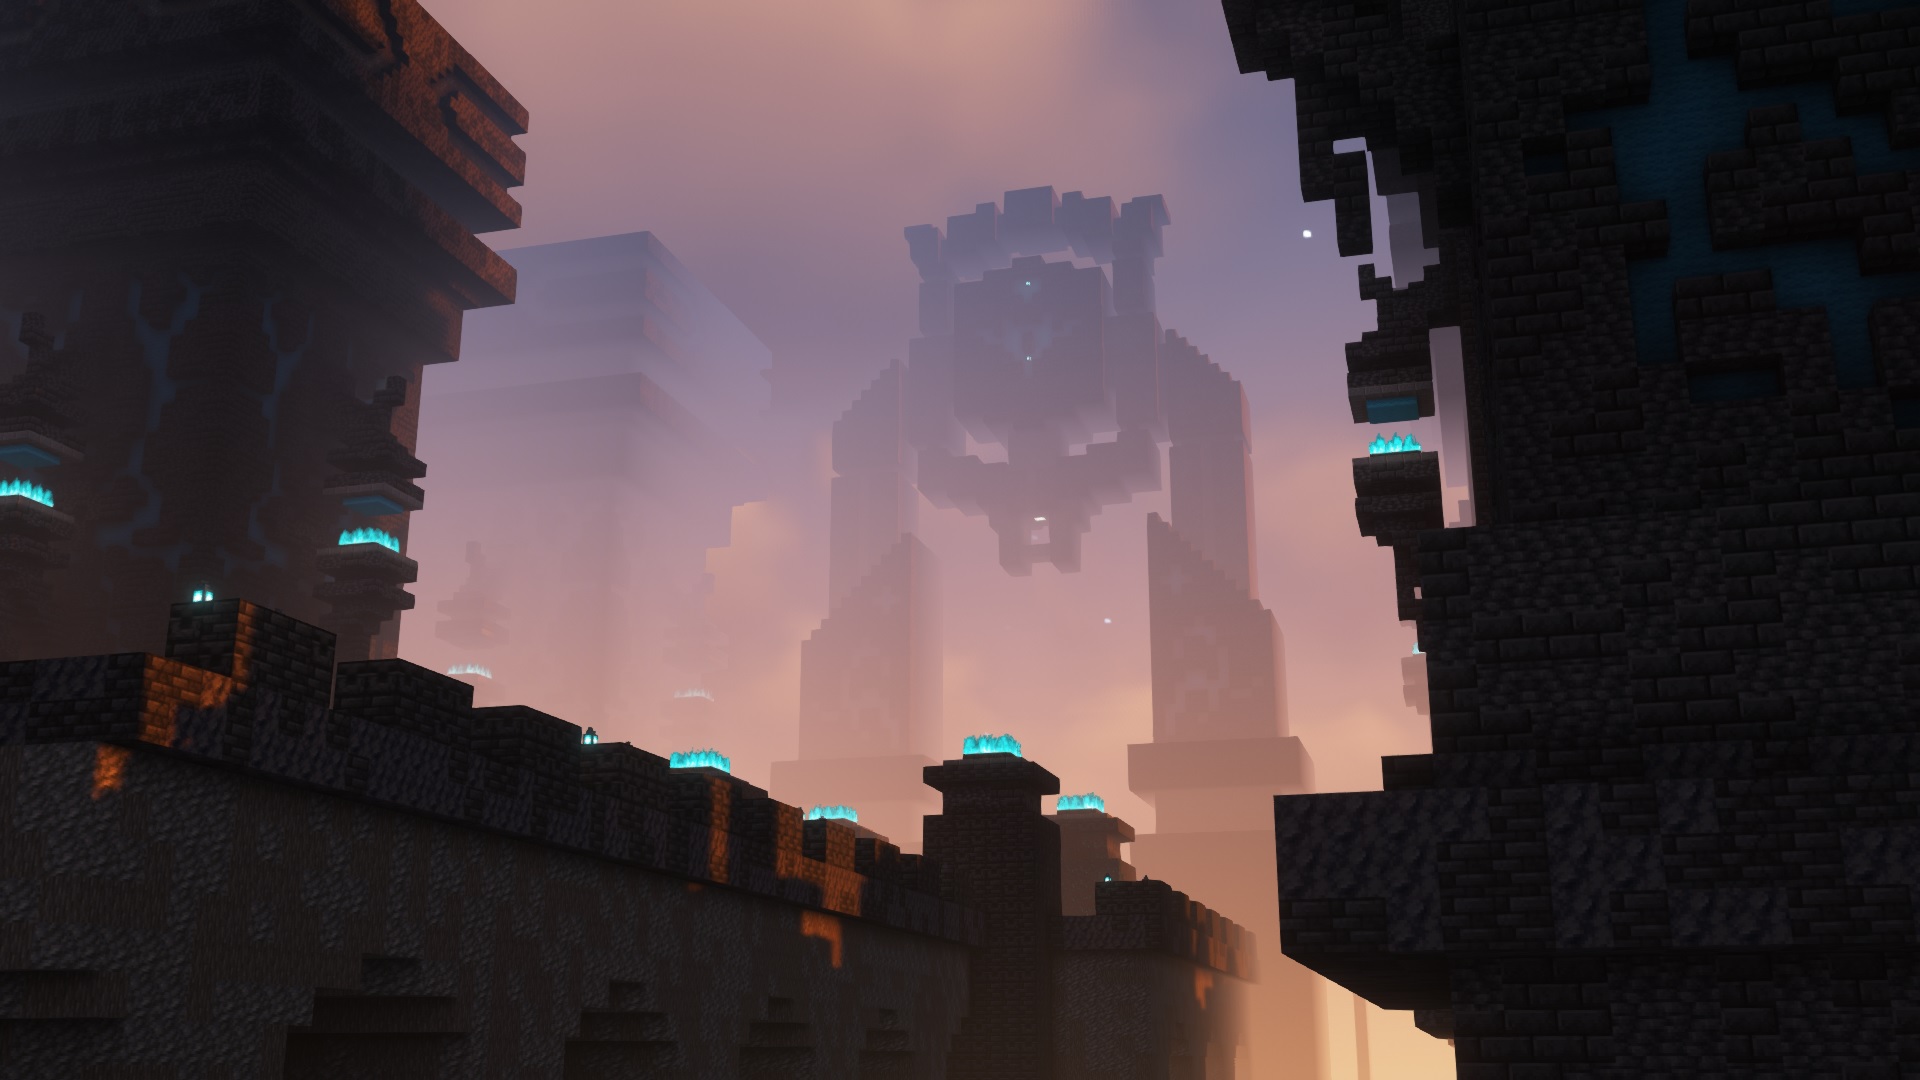 Minecraft build - a reimagined ancient city with a deepslate walkway lined with blue flames and a skull-shaped archway